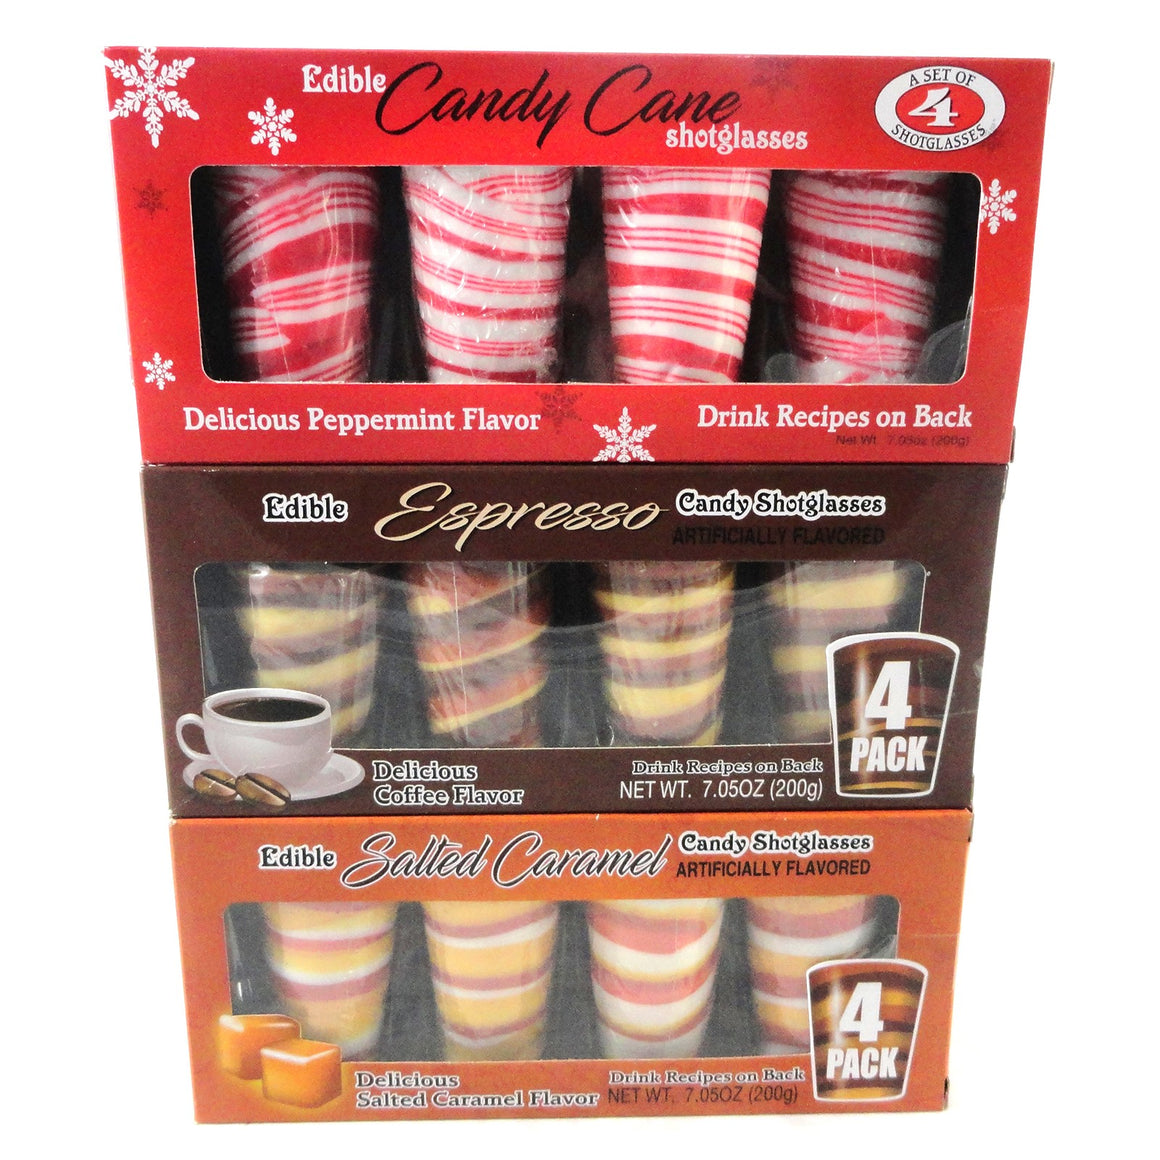 All City Candy Edible Shotglasses (Candy Cane, Espresso, Salted Caramel) Set of 4 7.05 oz. Box Christmas Hilco For fresh candy and great service, visit www.allcitycandy.com